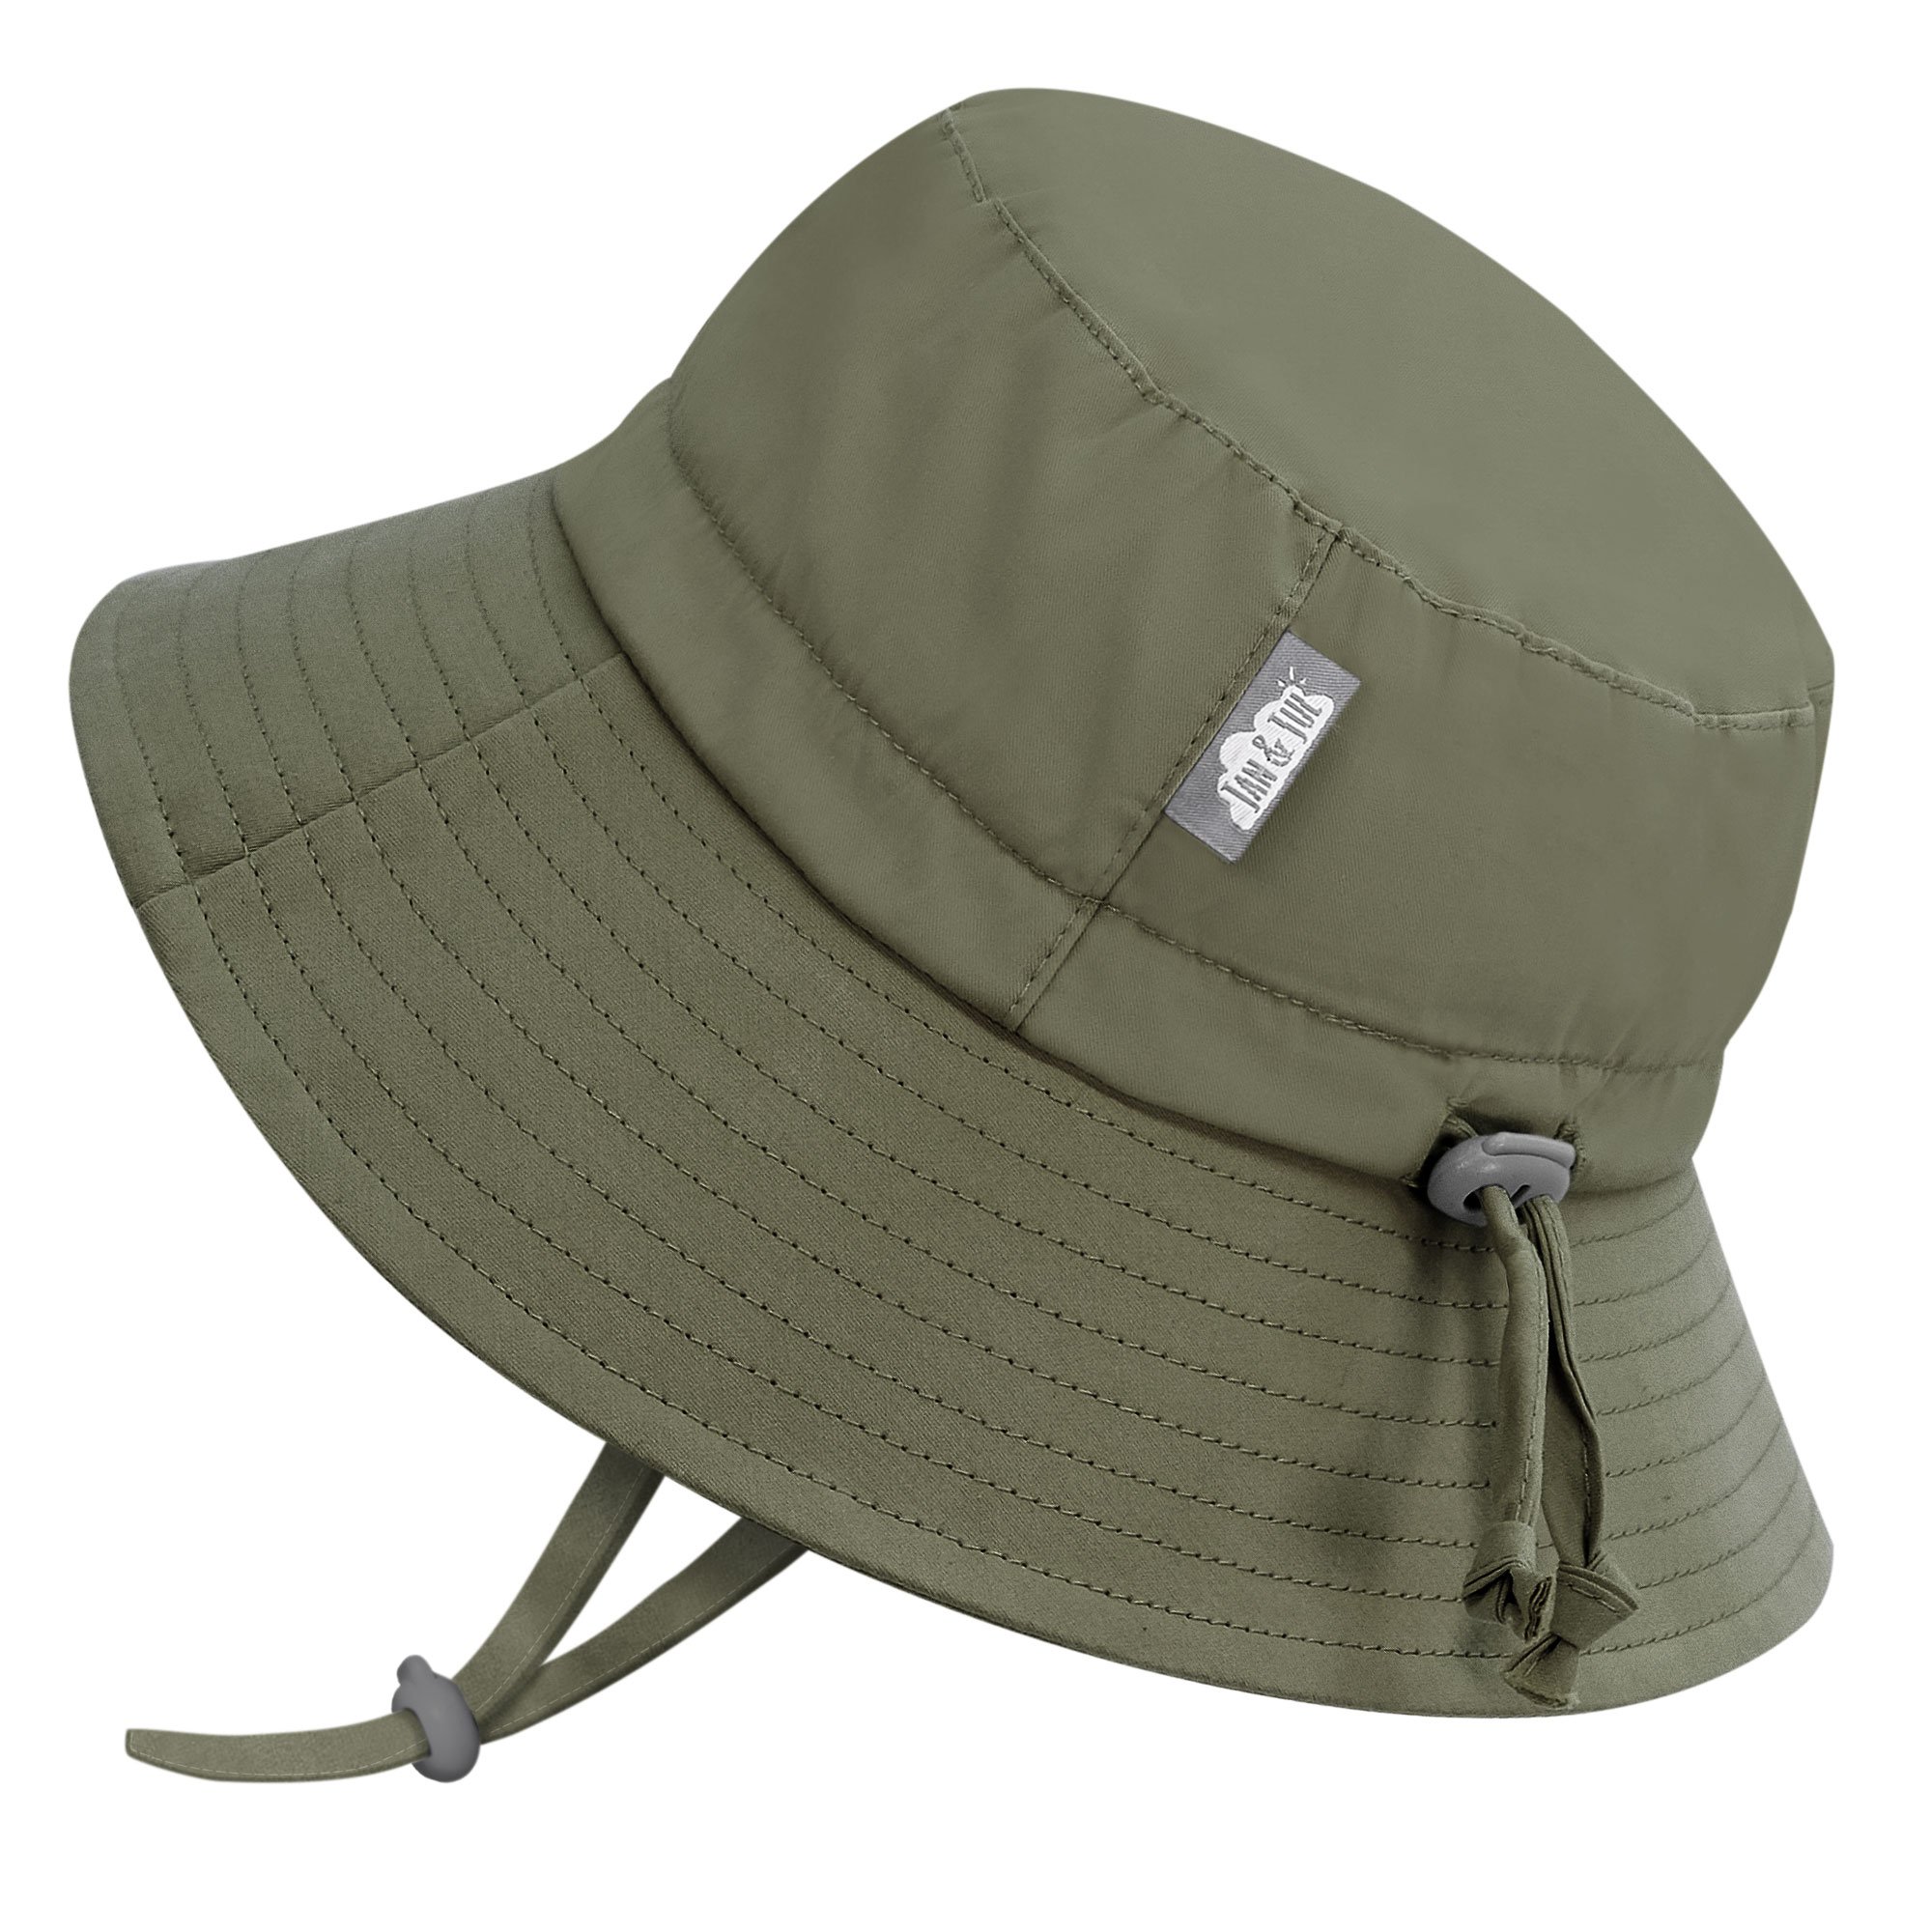 Kids Cotton Bucket Hats, Army Green for Toddlers